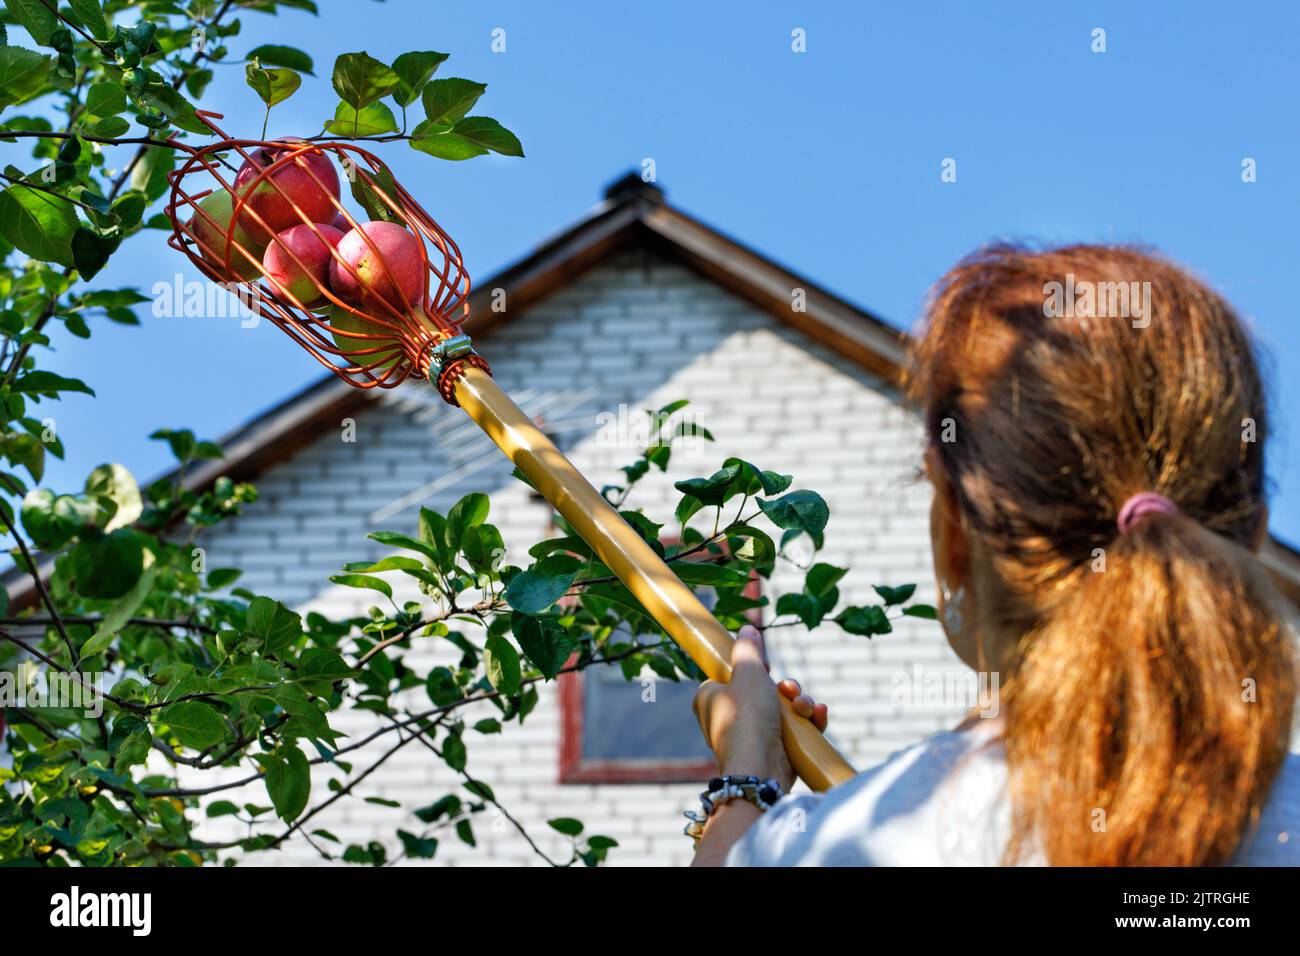 Fruit picker basket with ripe apples on blurred background of woman, house and sky. Stock Photo